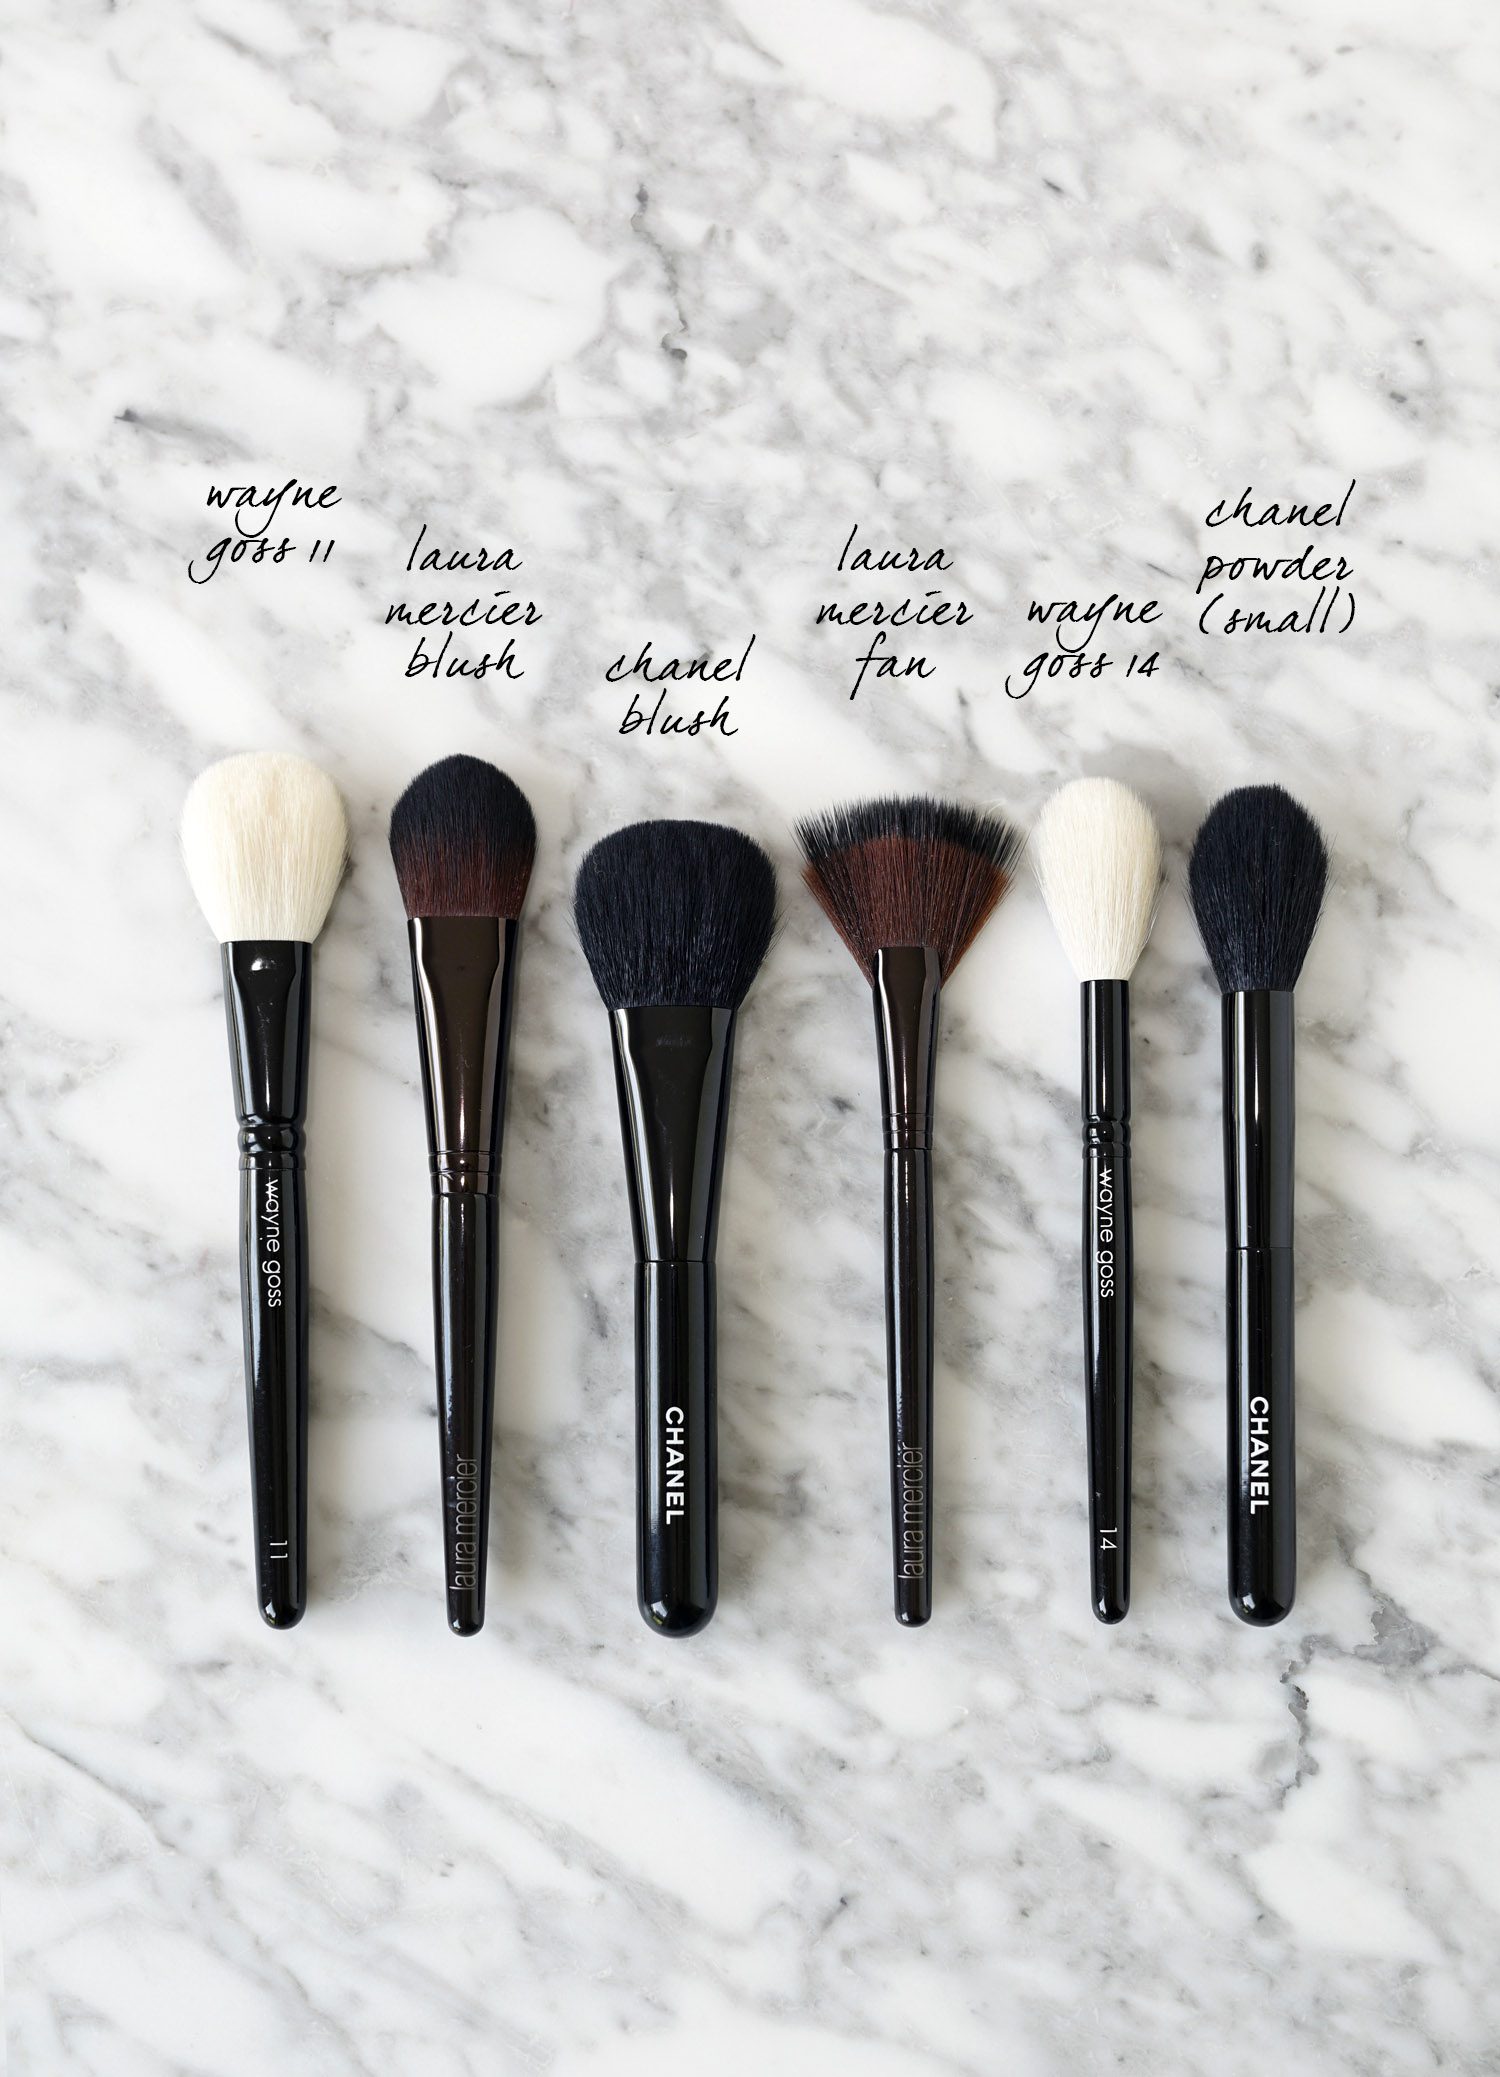 chanel brushes makeup